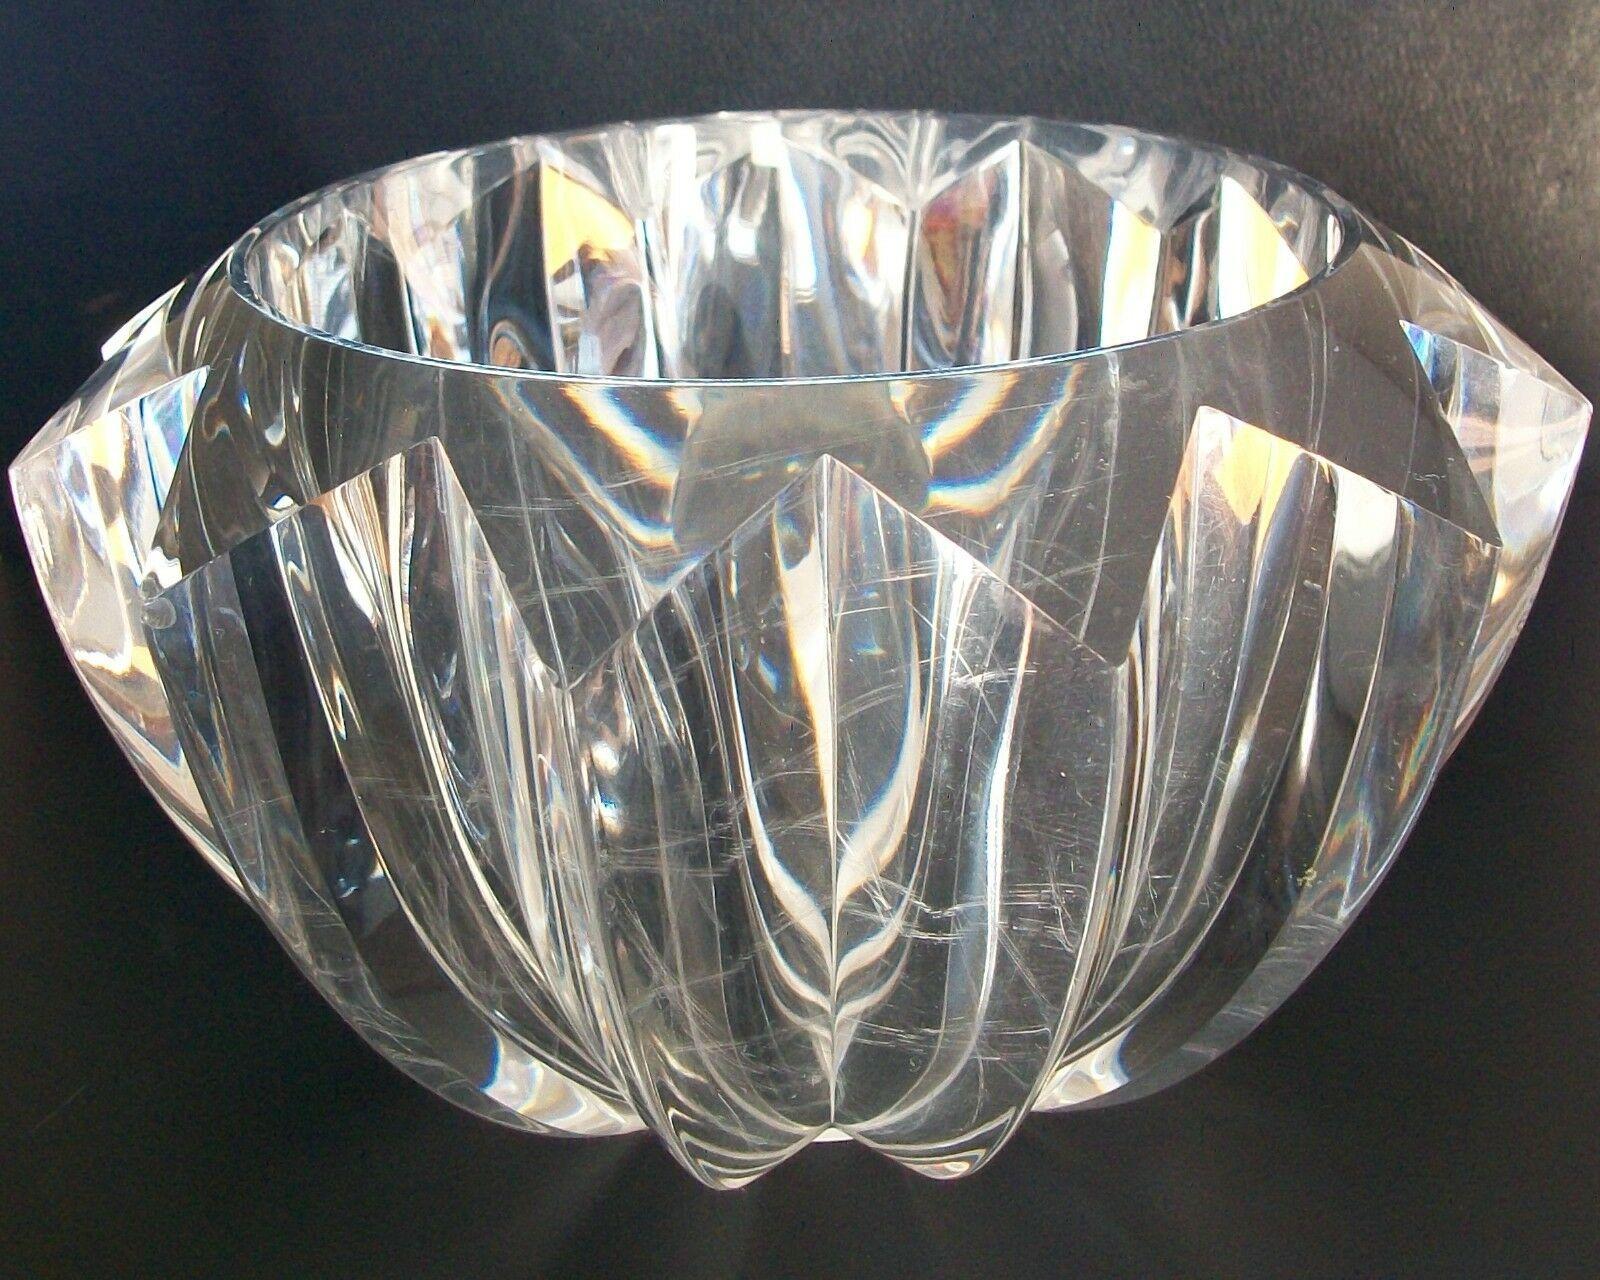 20th Century Mid-Century Modern Faceted Lucite Bowl, Unsigned, United States, Circa 1970's For Sale